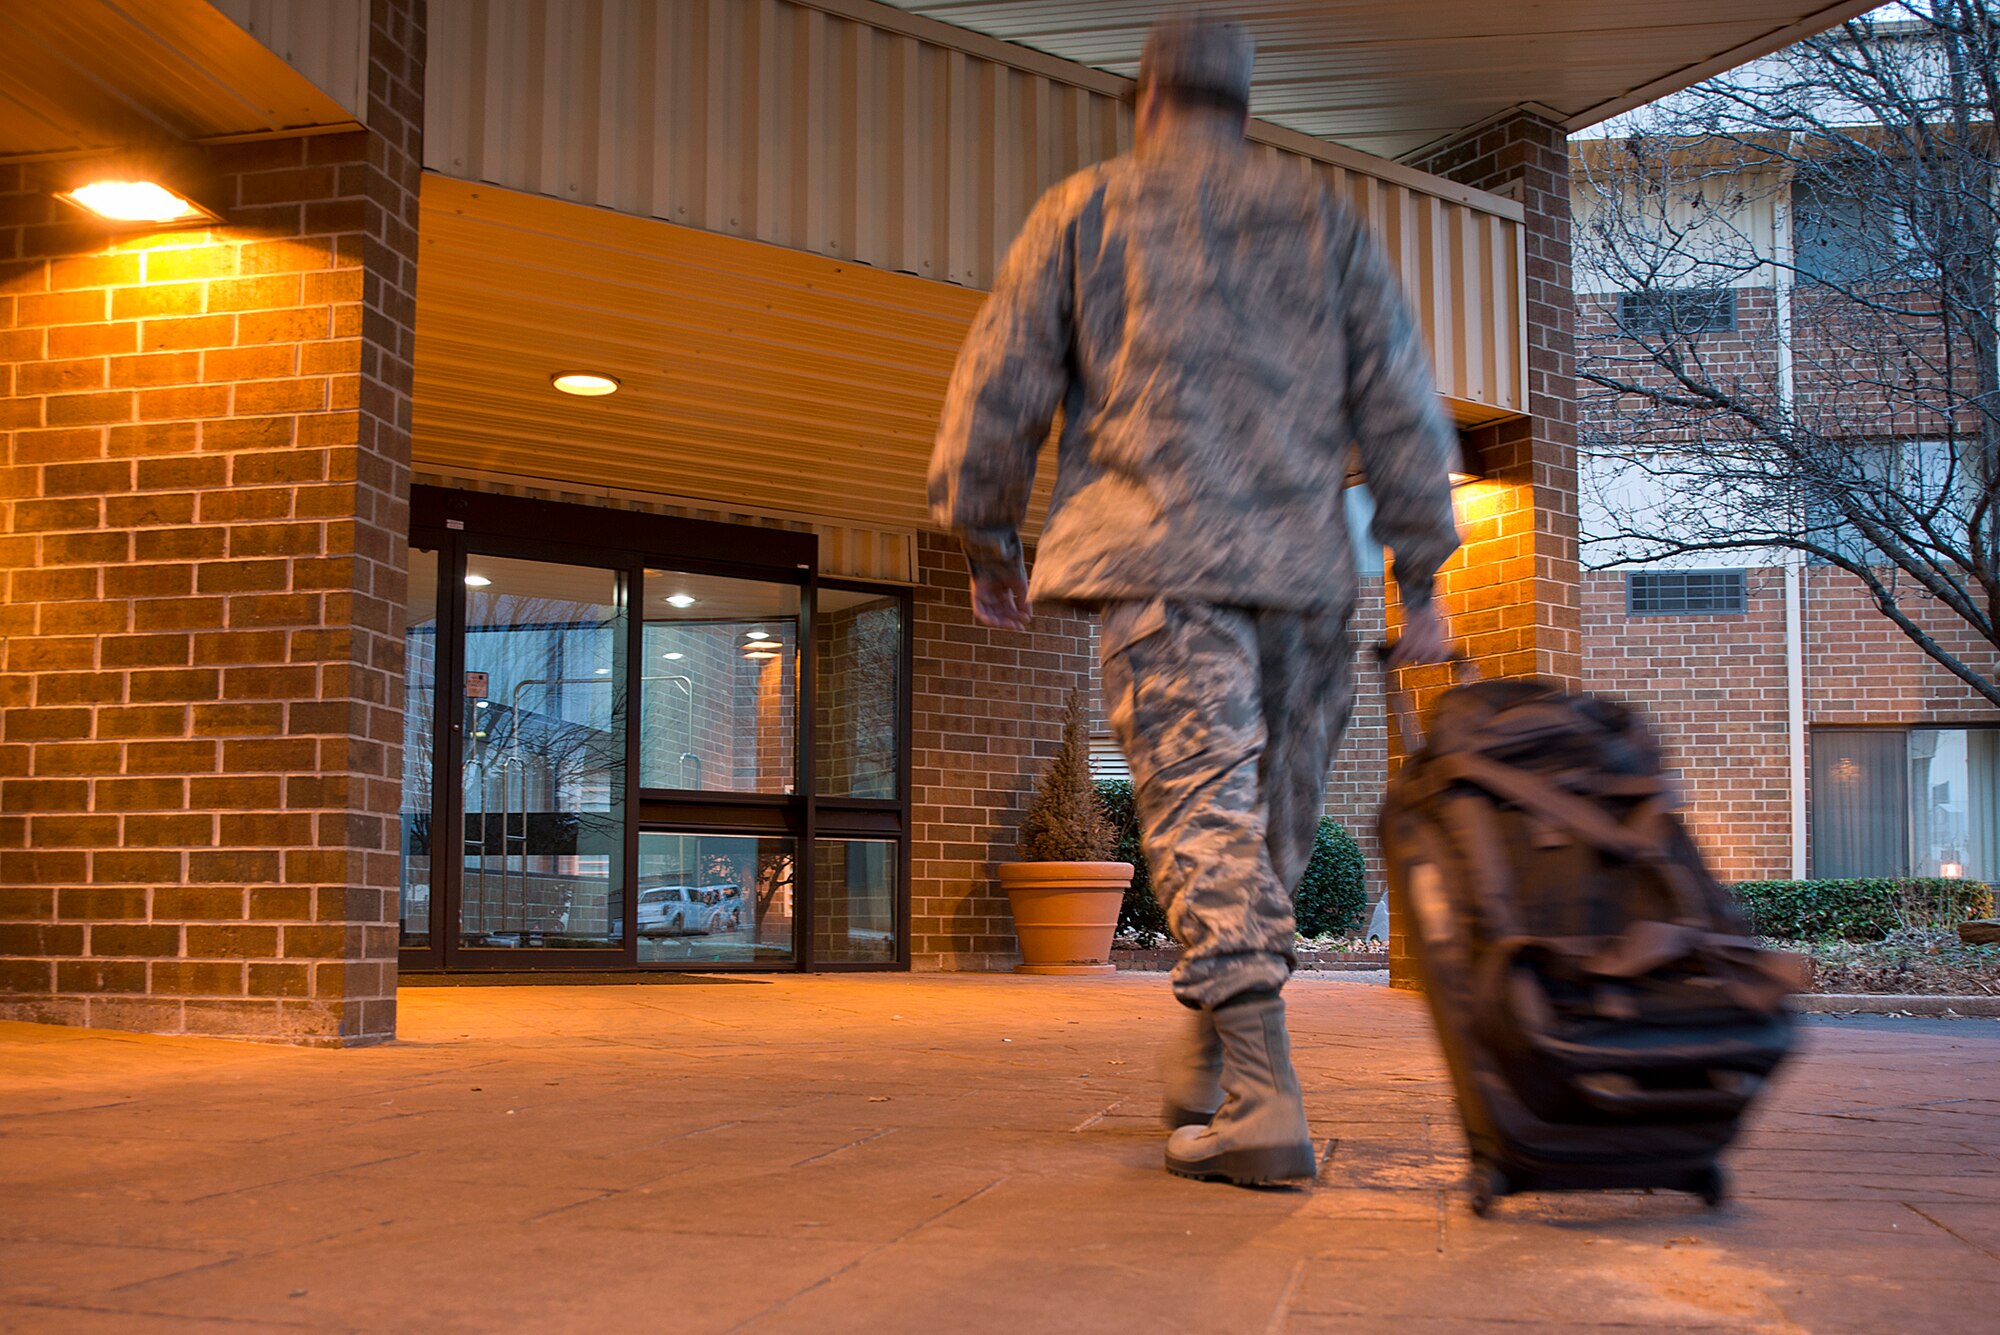 A member of the 137th Air Refueling Wing checks into a hotel near Will Rogers Air National Guard Base. (U.S. Air National Guard photo by Master Sgt. Andrew LaMoreaux/Released)